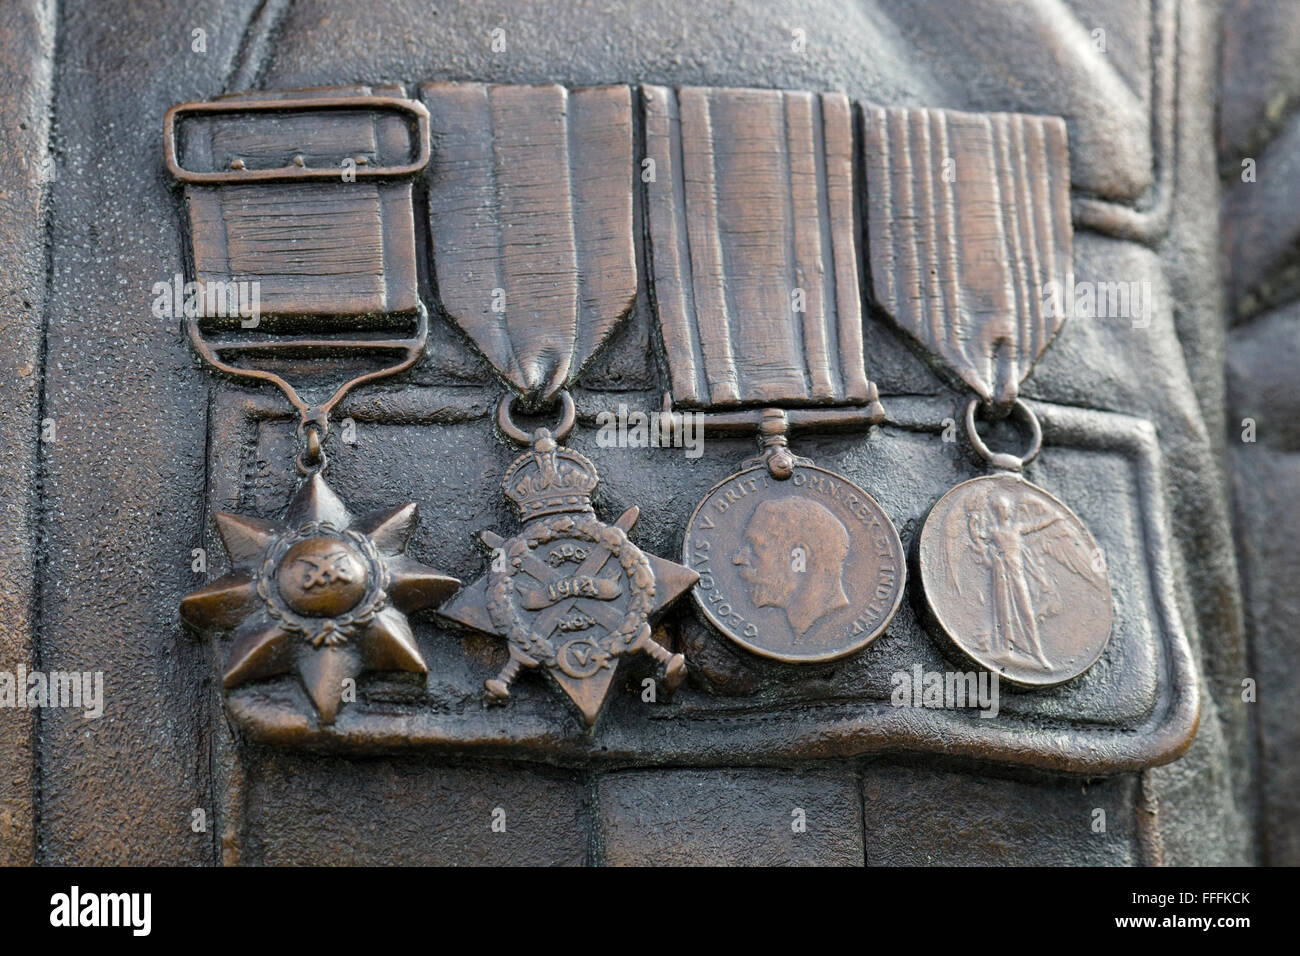 Remembering the Armed forces, Sikh soldiers Medals in Bronze Stock Photo